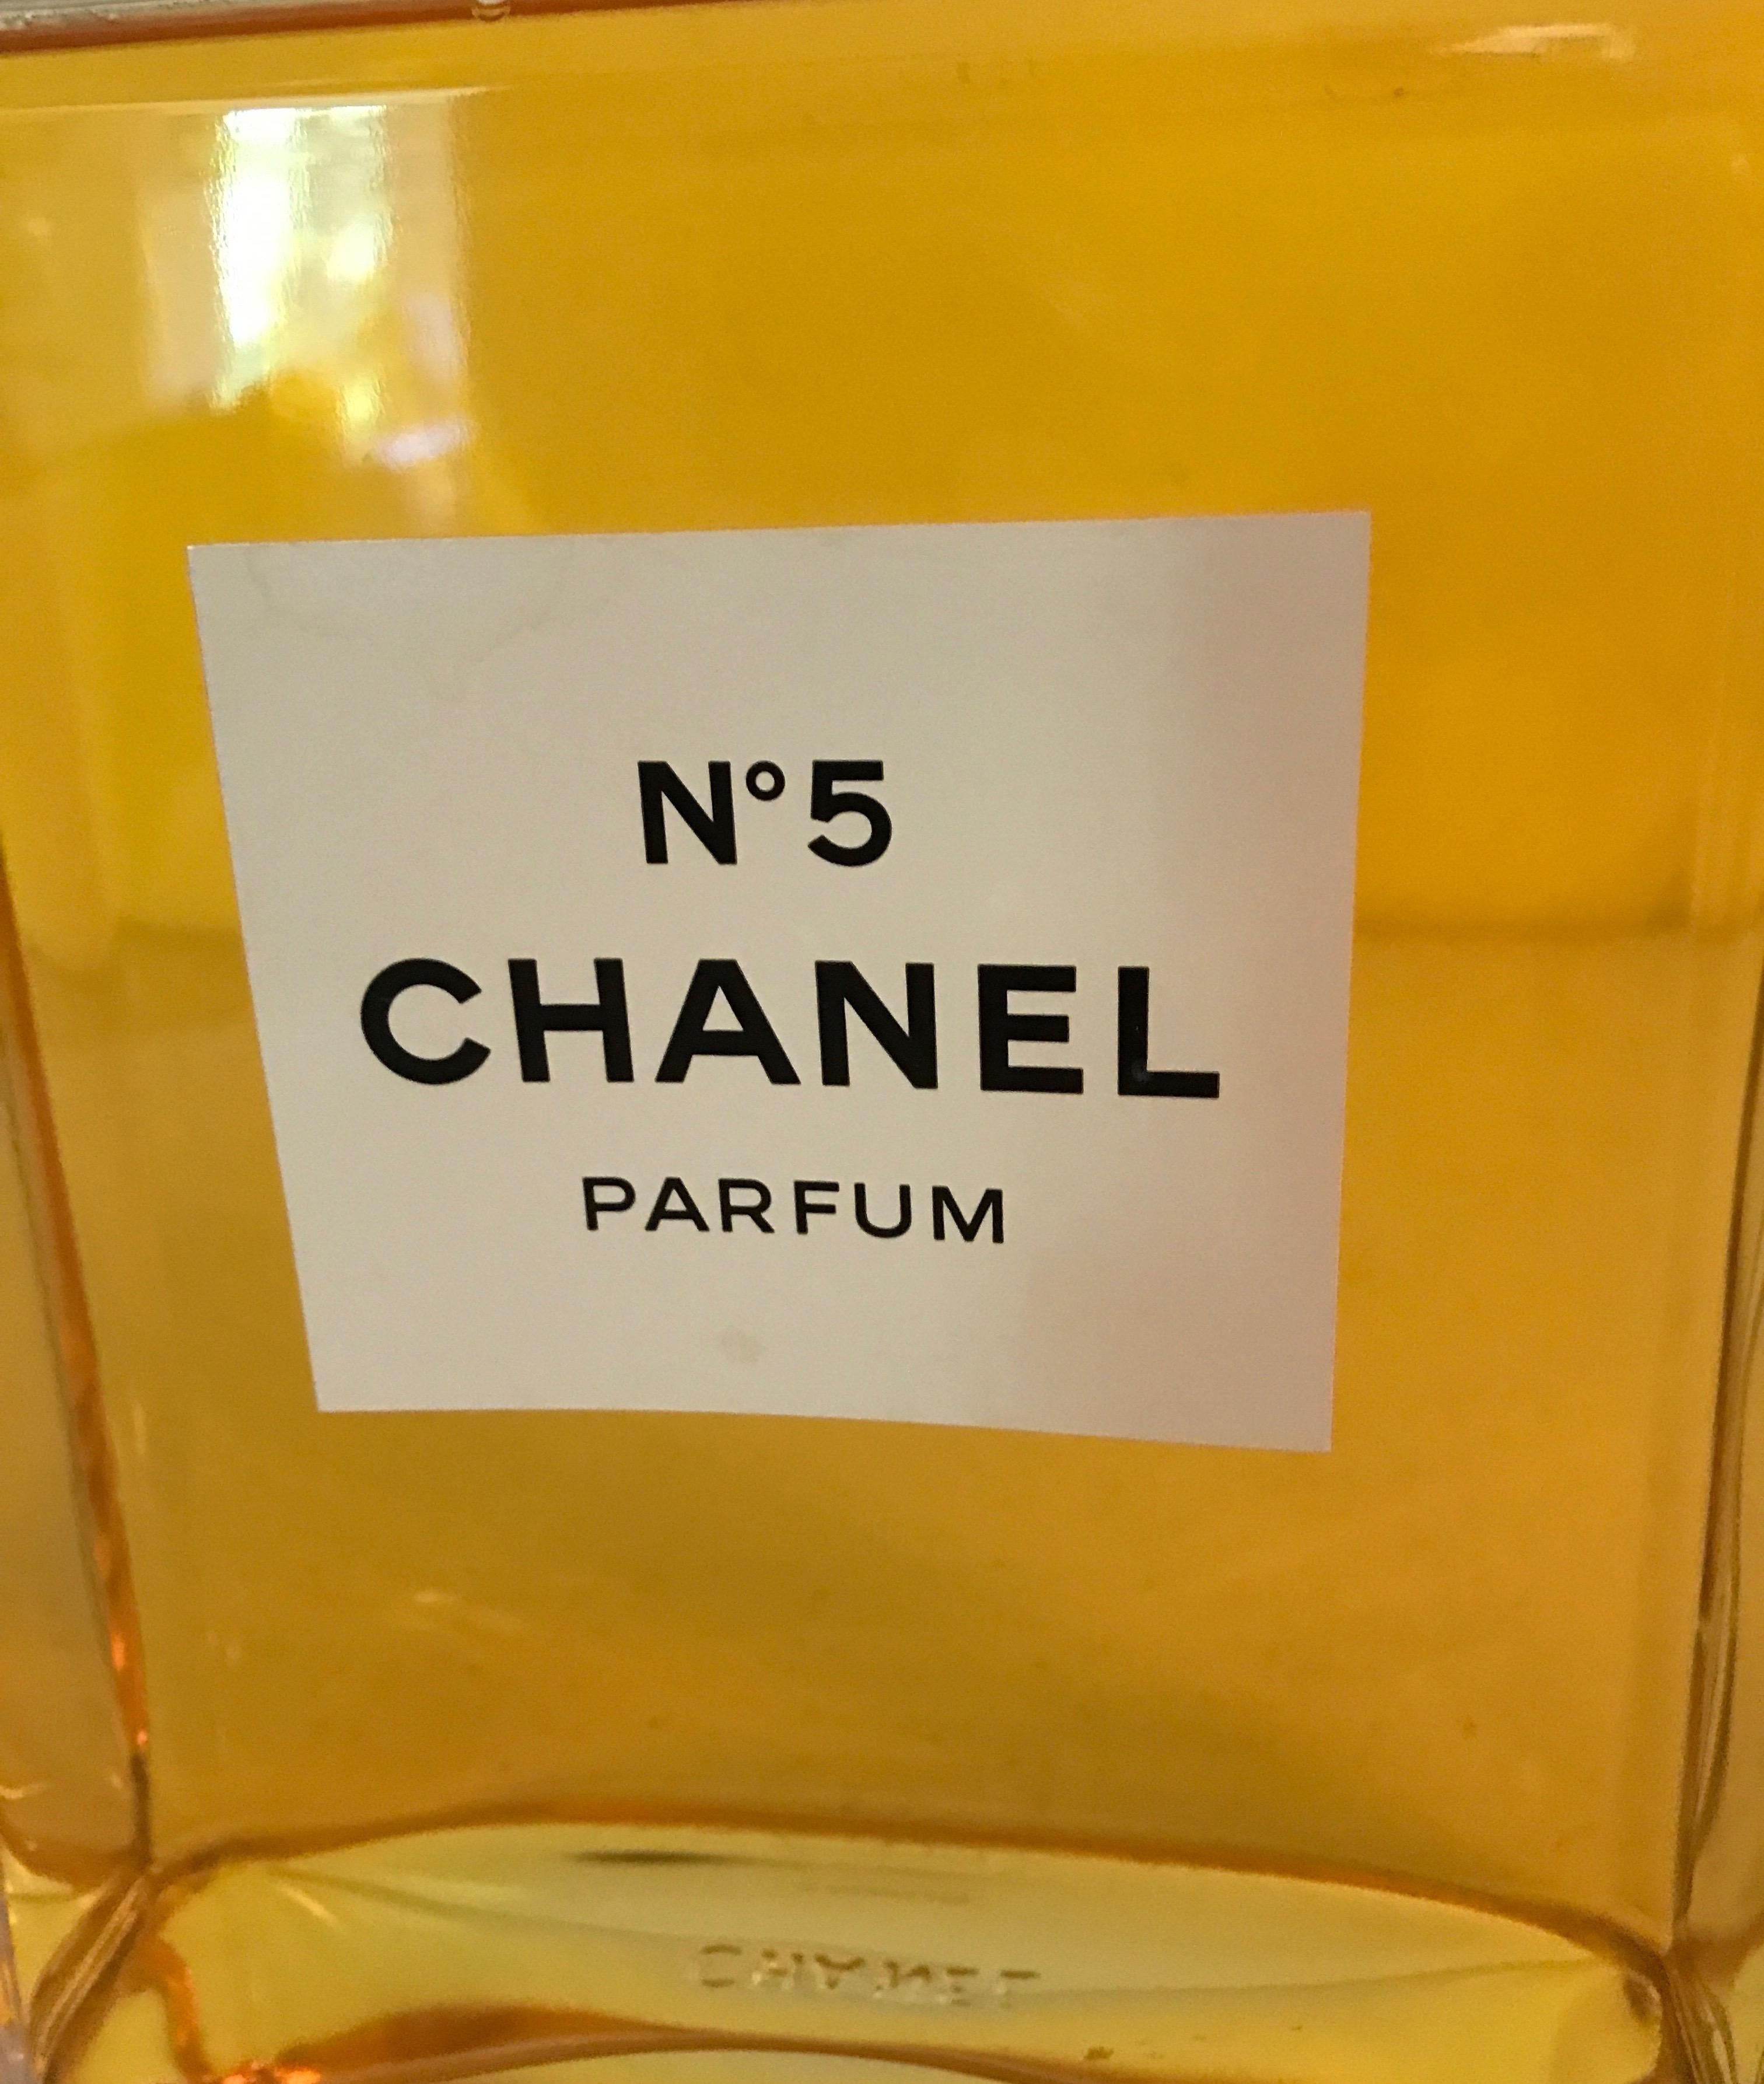 Large Chanel Fatice bottle of the famed perfume.